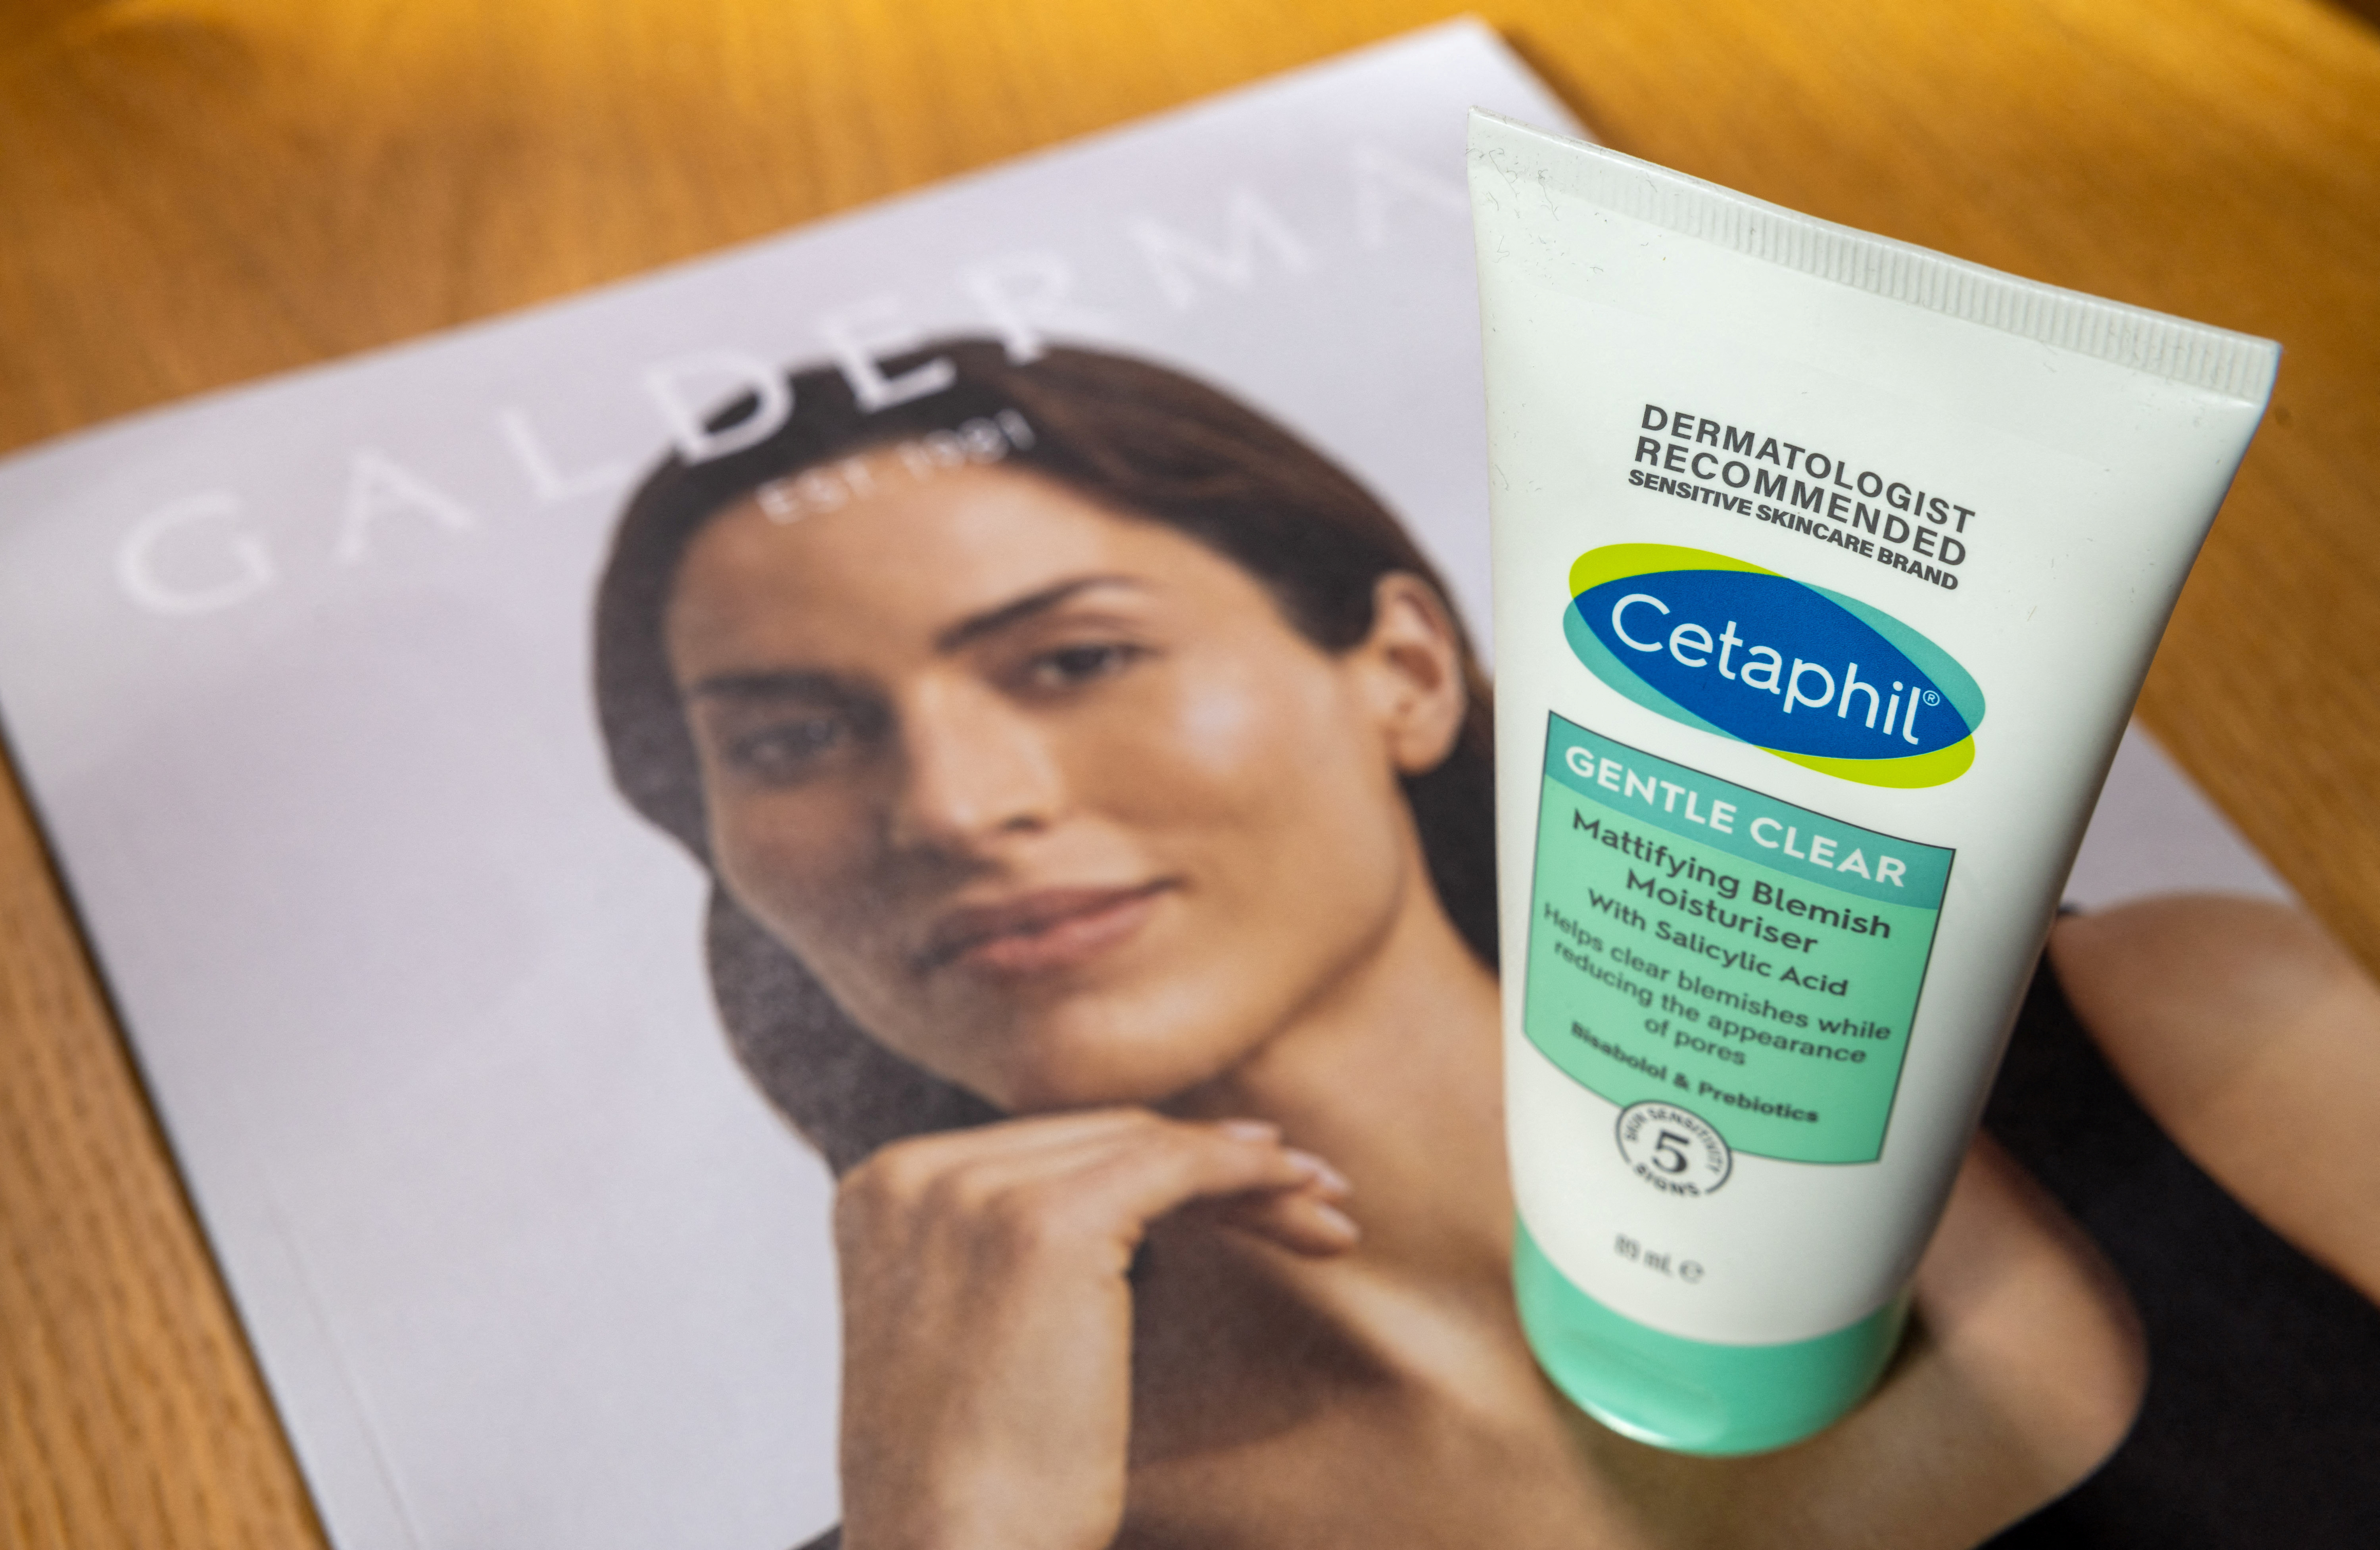 Cetaphil skin care product, owned by Galderma, is pictured in the company's offices in Lausanne